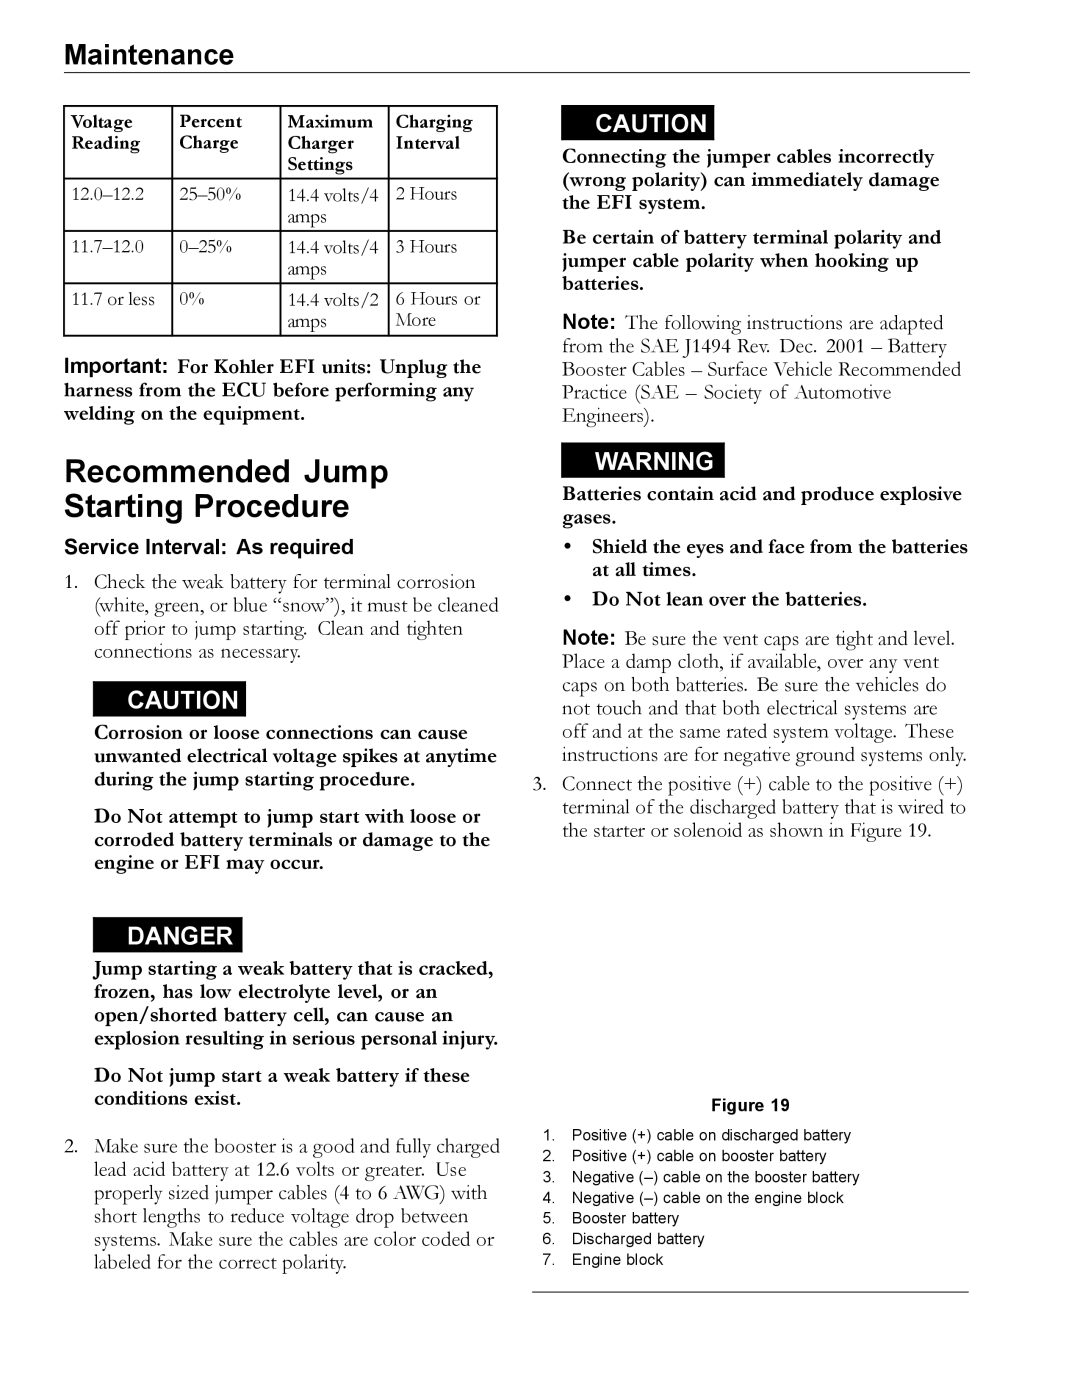 Exmark 920 manual Recommended Jump Starting Procedure, Do Not jump start a weak battery if these conditions exist 